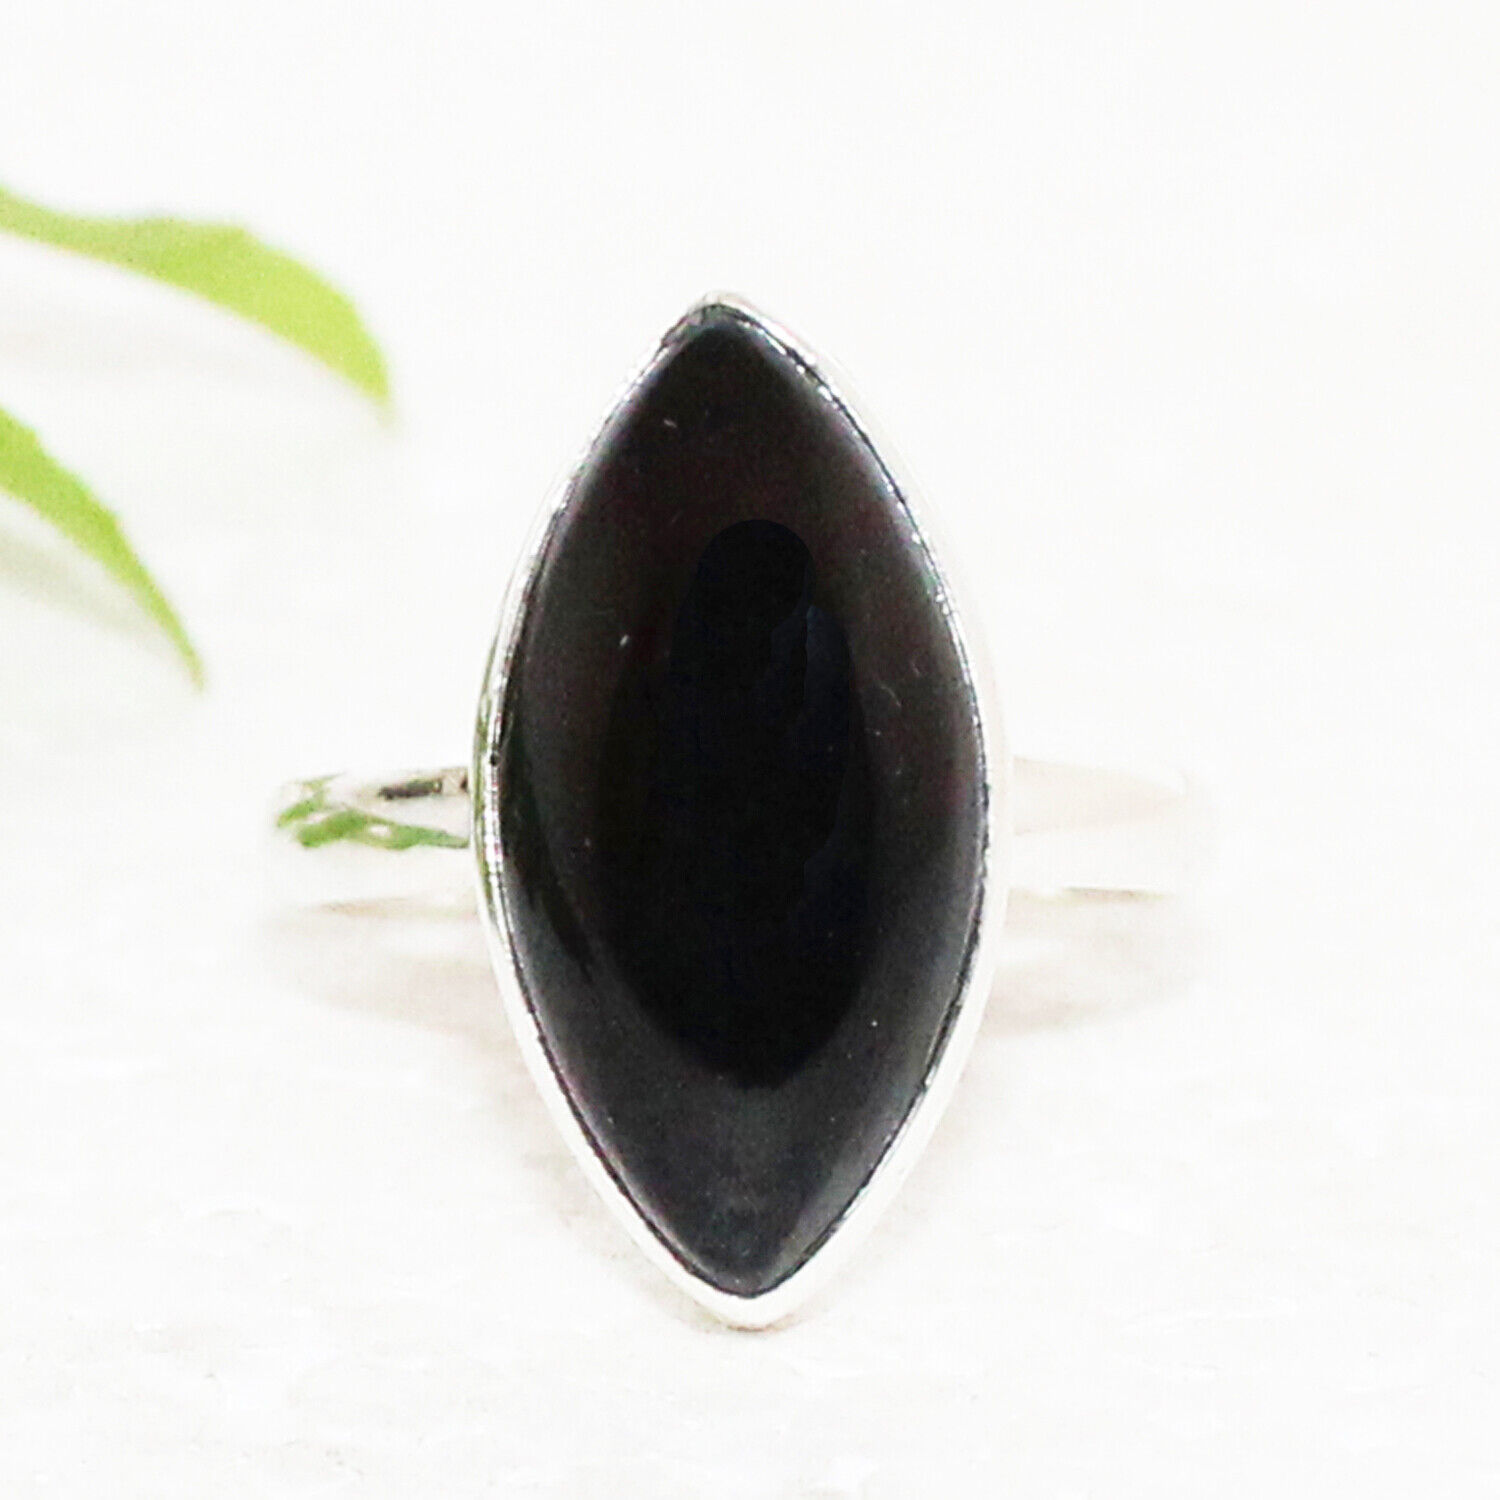 Primary image for 925 Sterling Silver Black Onyx Ring Handmade Jewelry Gemstone Ring